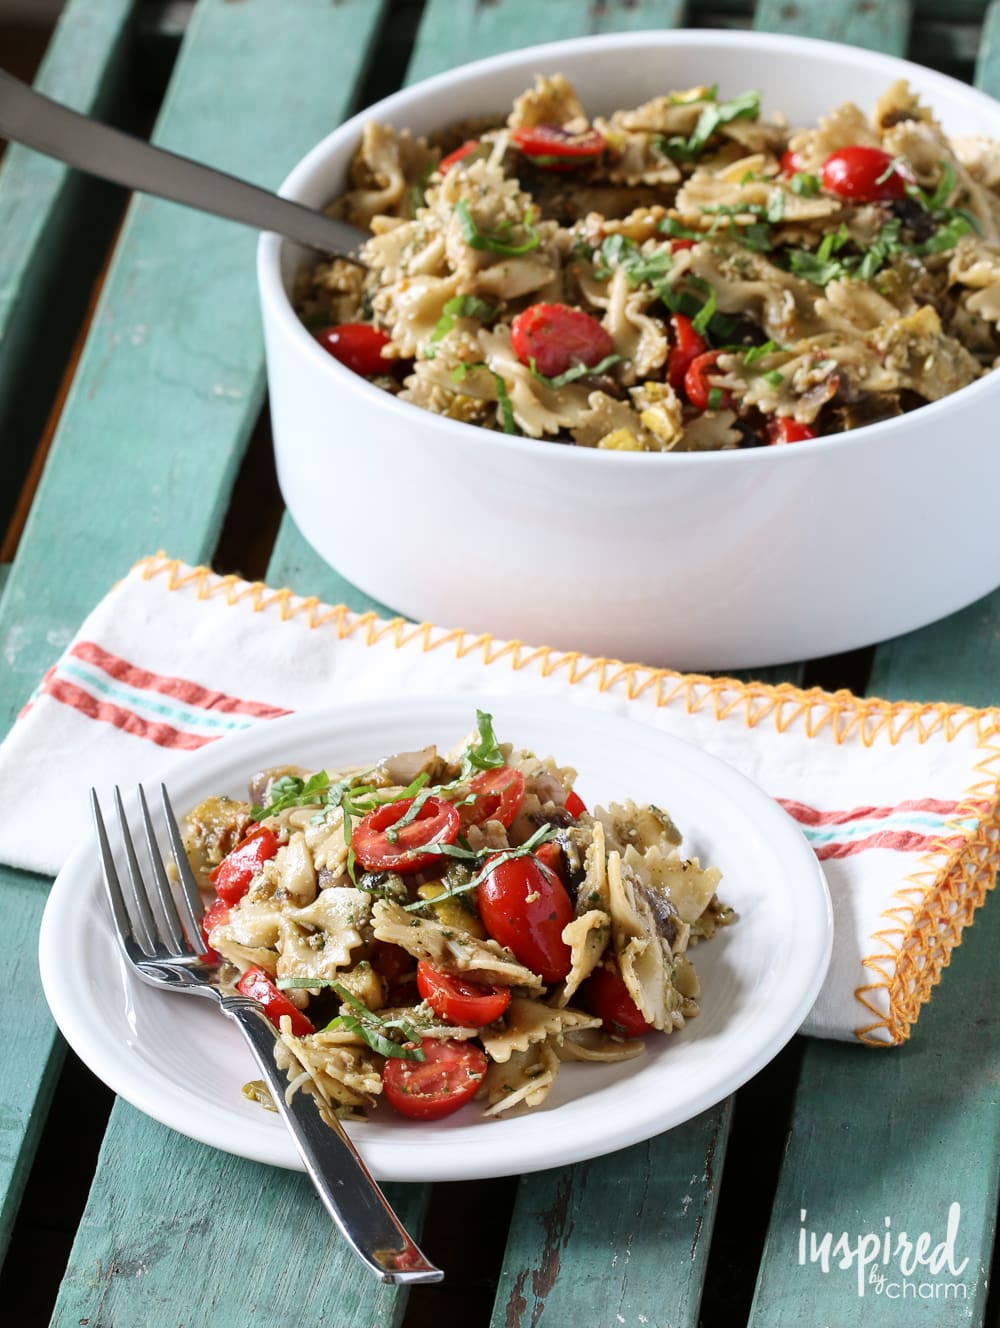 Roasted Vegetable Pasta Salad | Inspired by Charm